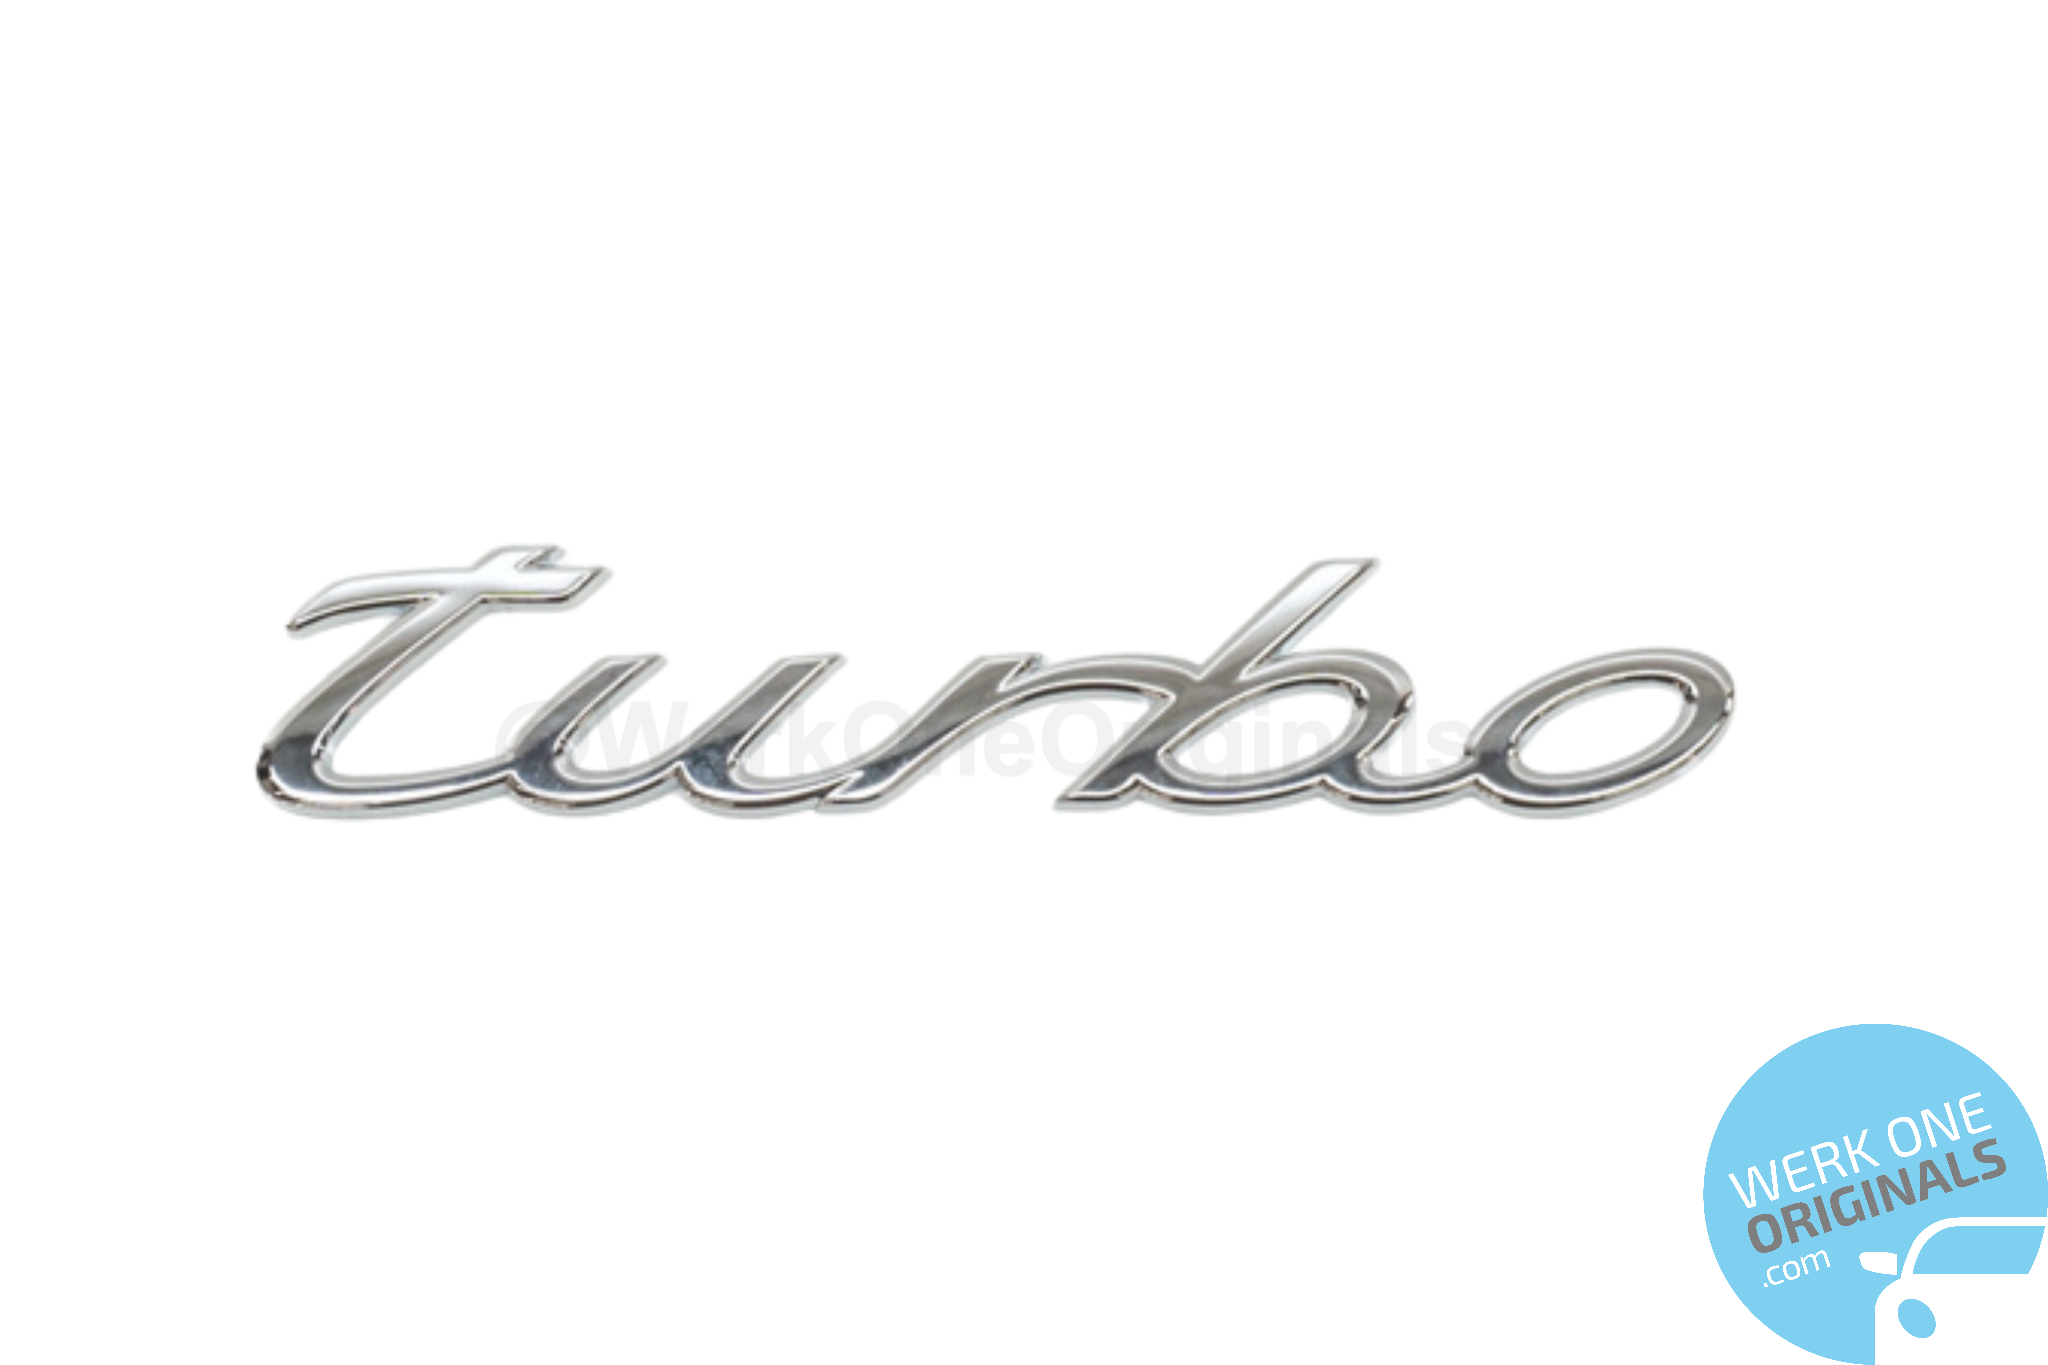 Porsche Official 'Turbo' Rear Badge Logo in Chrome Silver for Macan Turbo Models